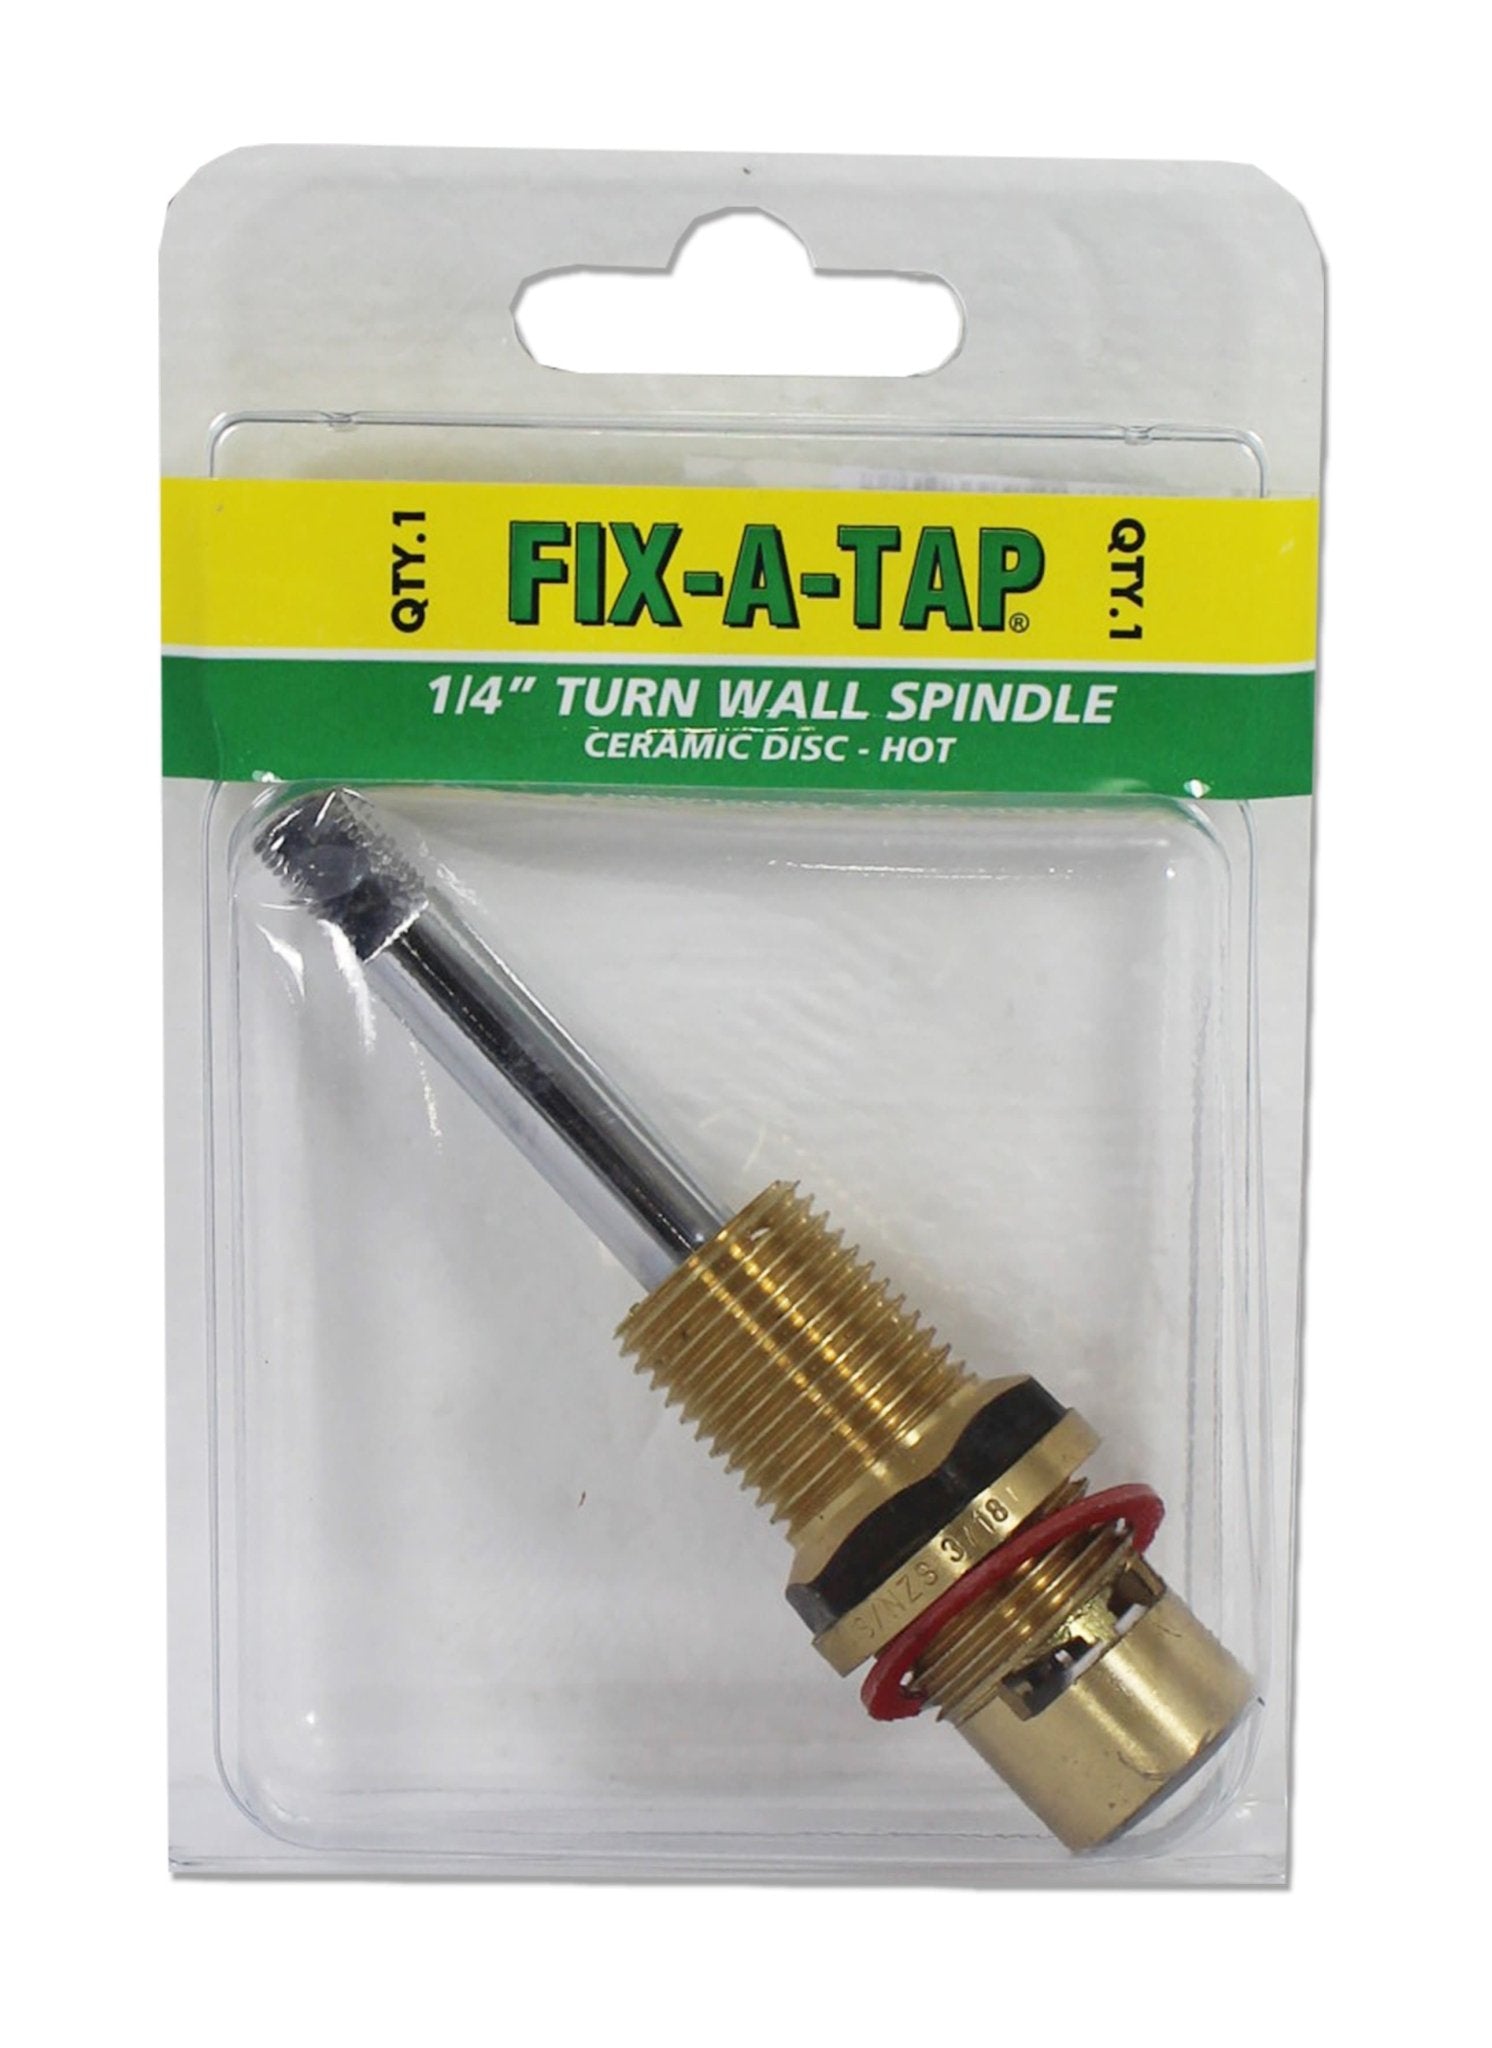 FIX-A-TAP Ceramic Disc Wall 1/4 Turn Hot 240514 - Double Bay Hardware